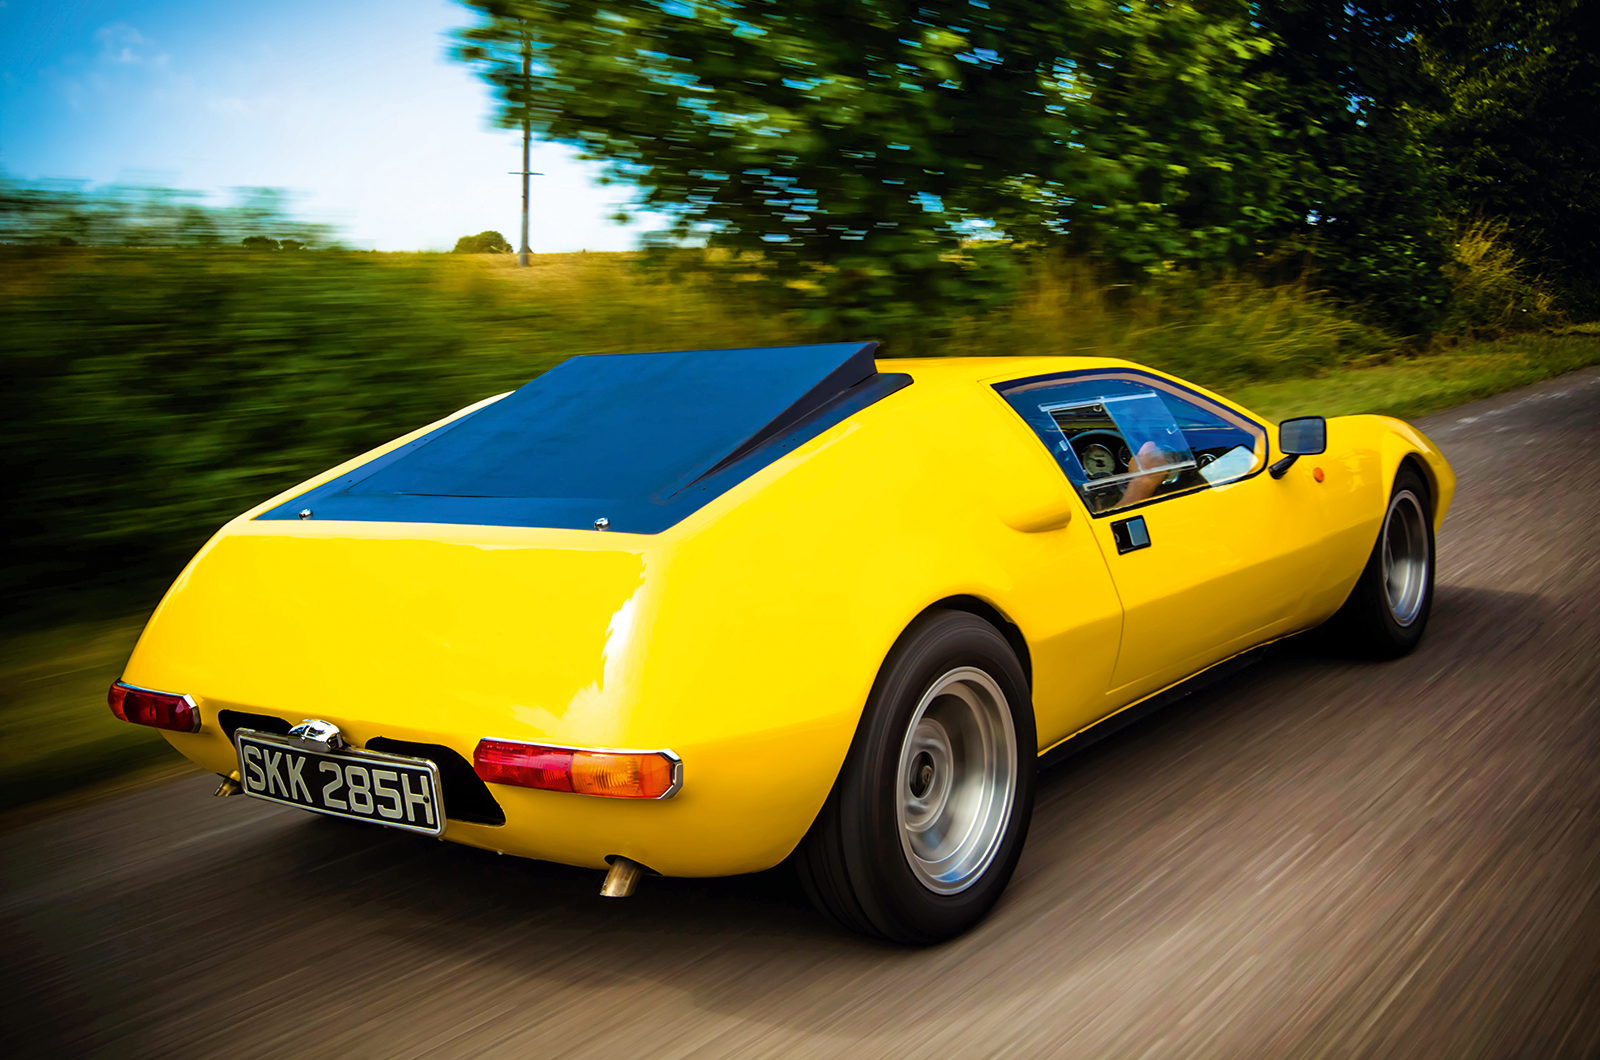 Classic & Sports Car – One-off Gilbern T11: back to life